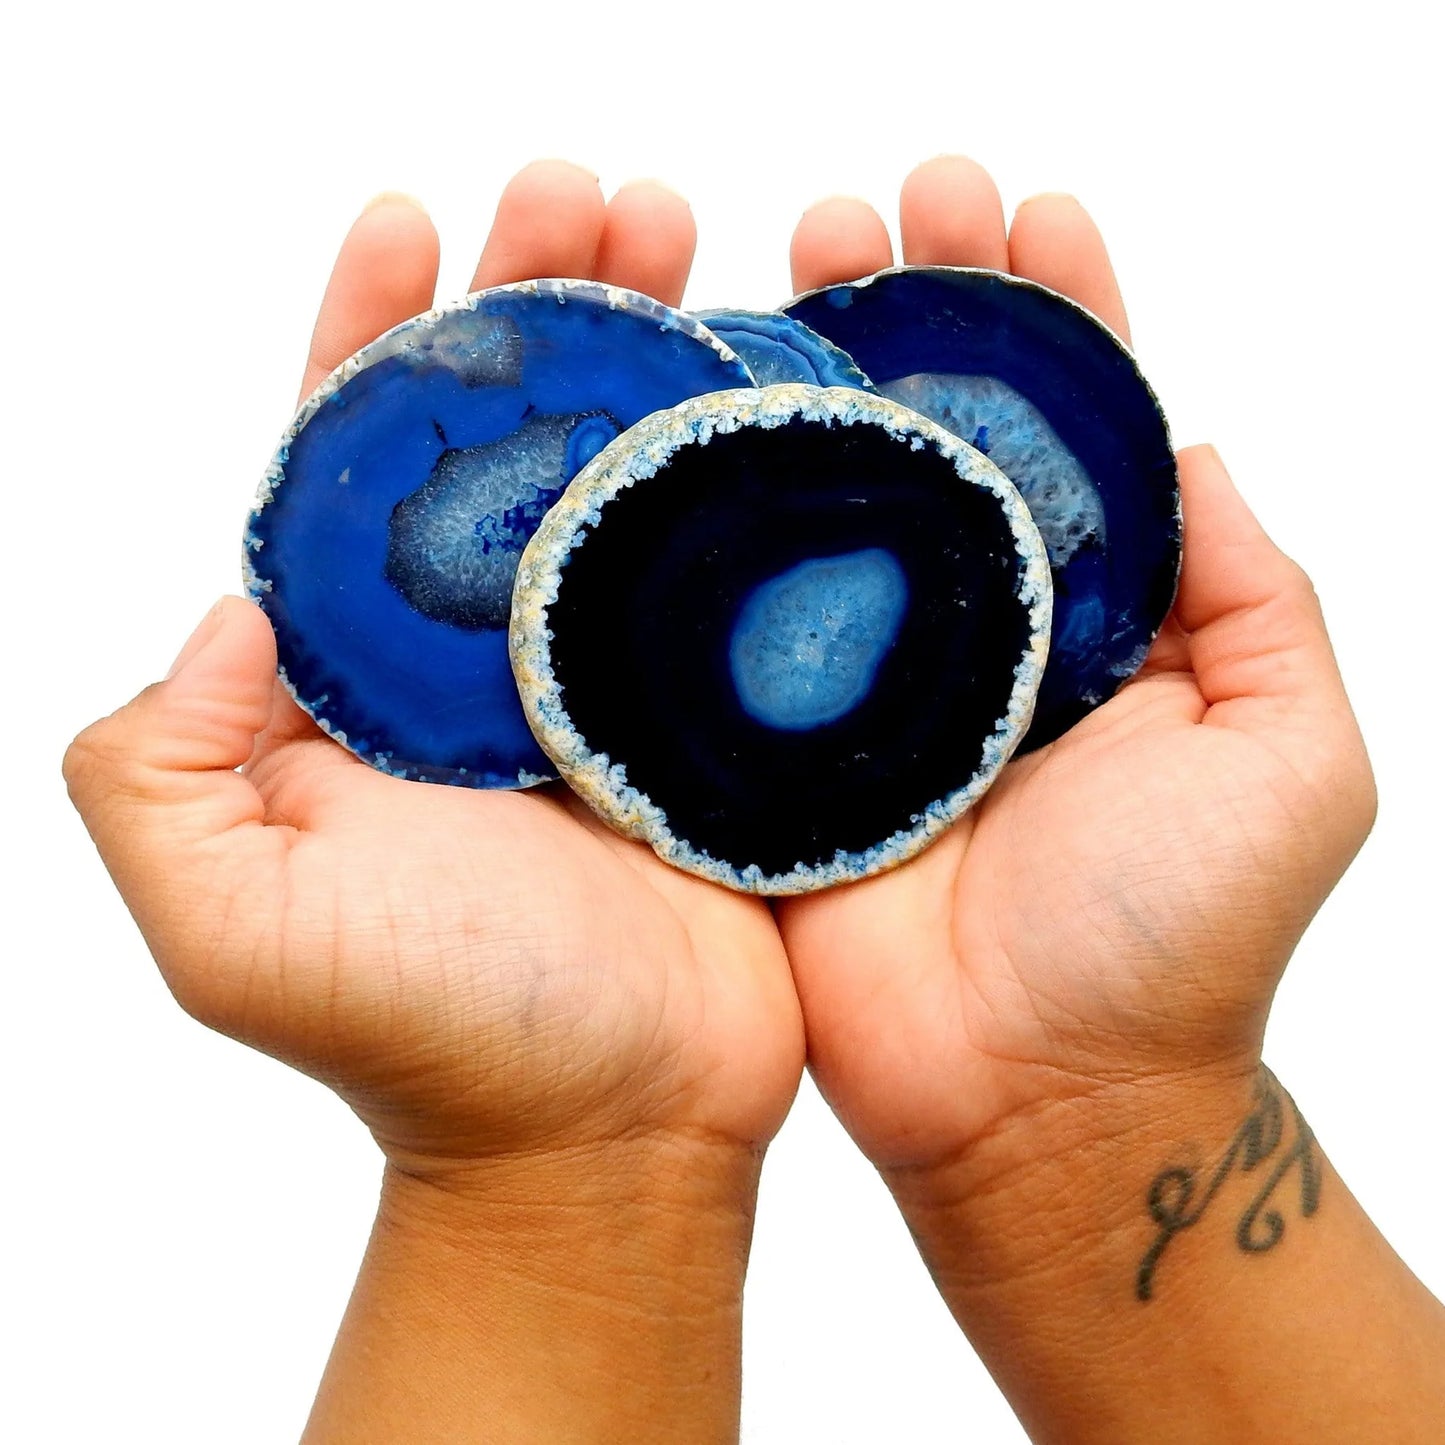 "Once upon a time" | Blue Agate Slice Shelf Sitter | Multiple Colors Available